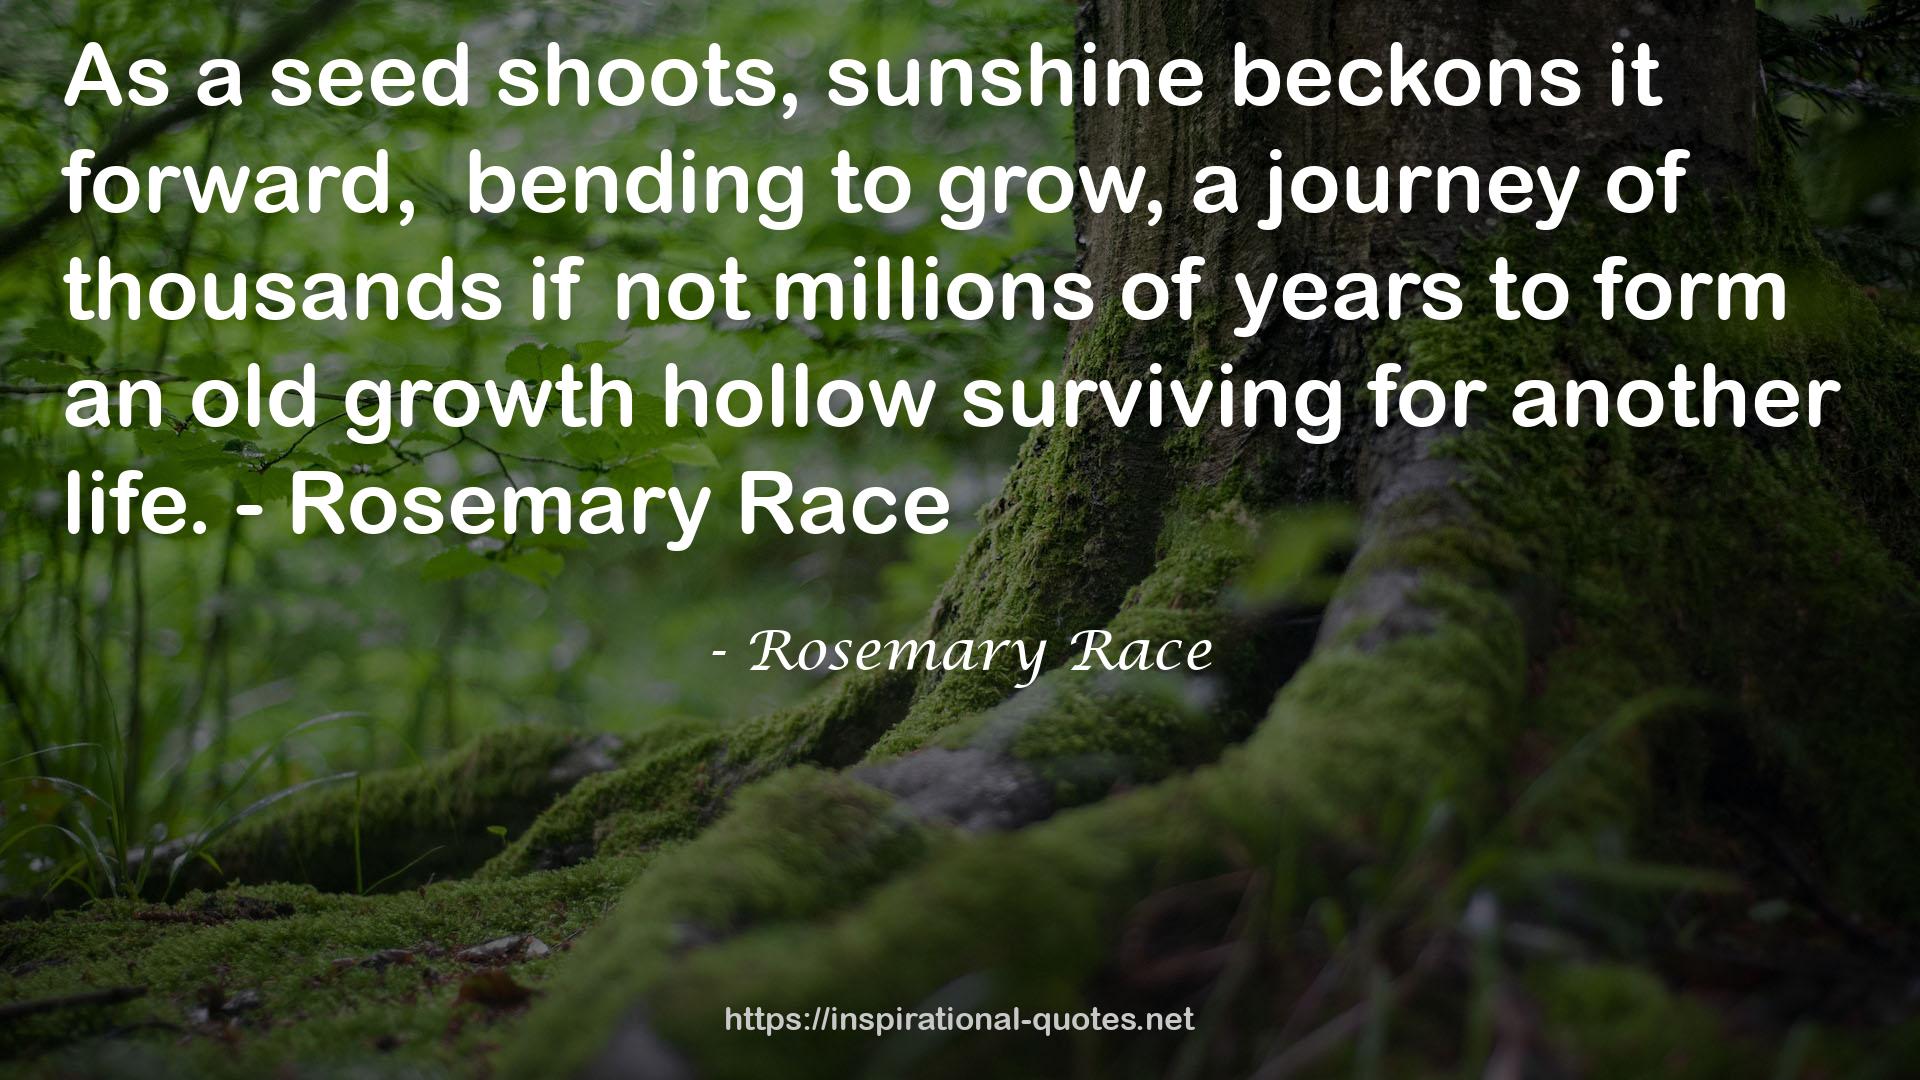 Rosemary Race QUOTES